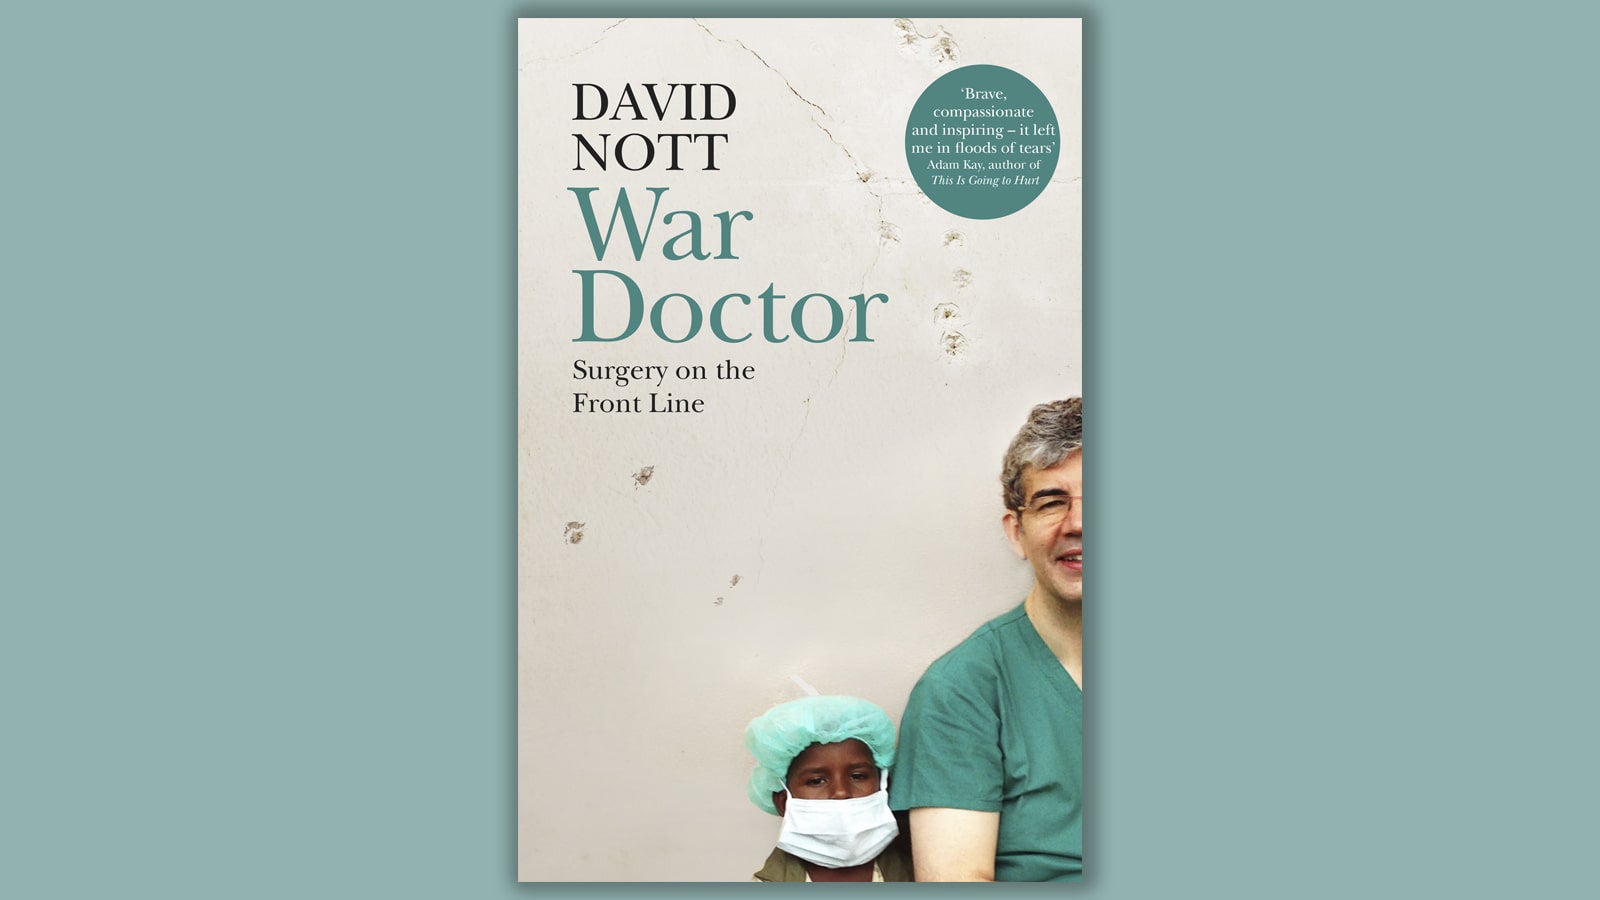 David Nott War Doctor book cover on a teal background